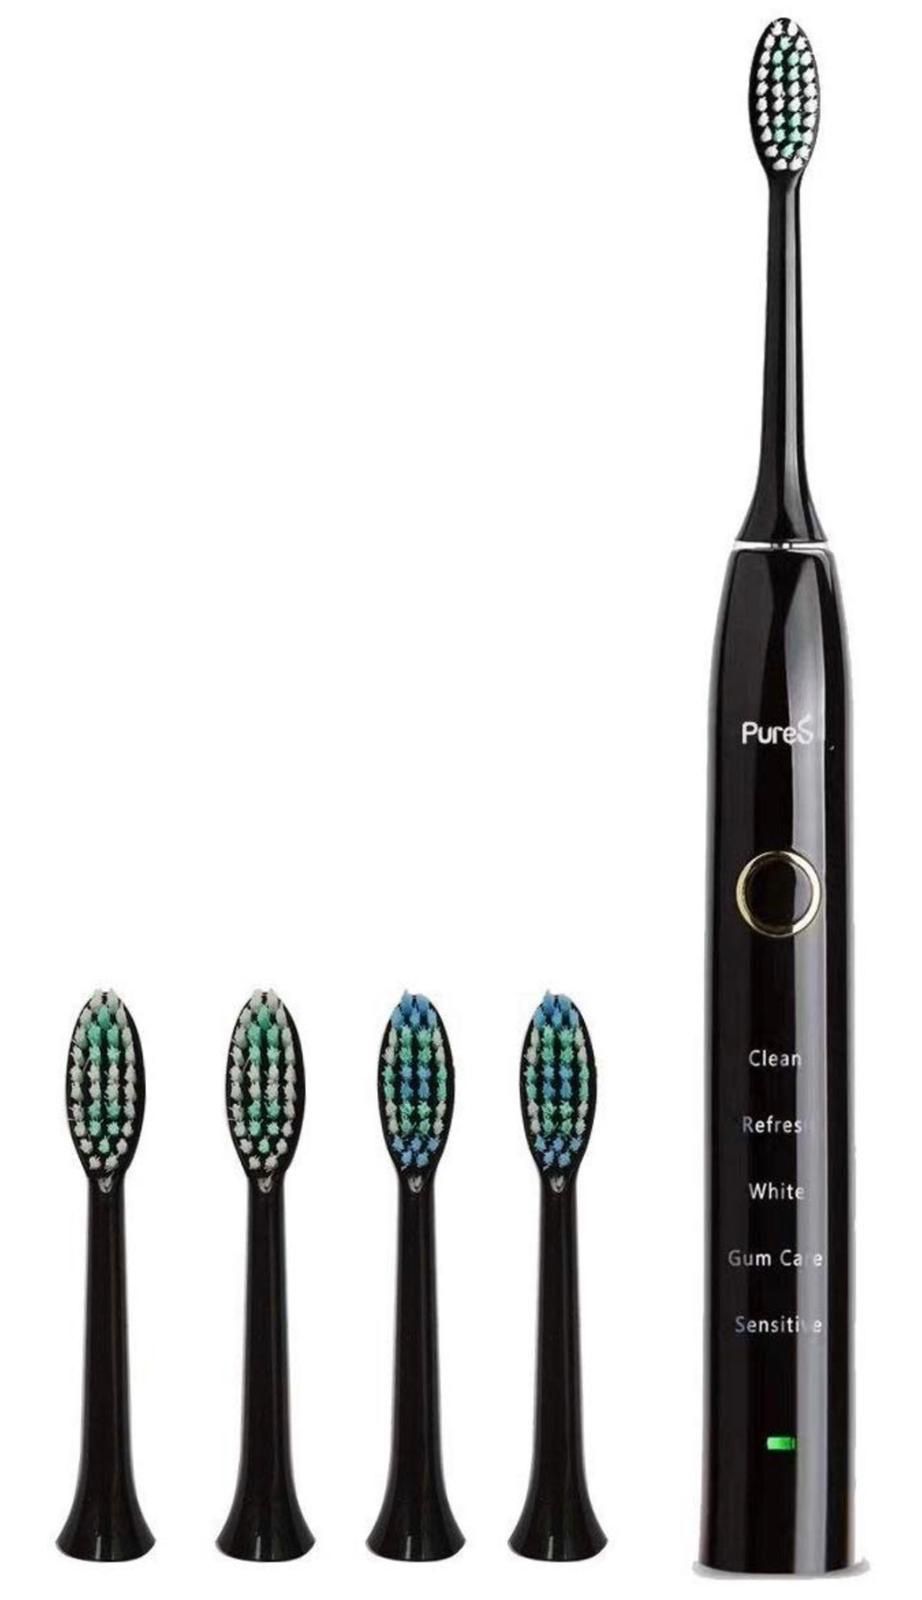 New in box Sonic Electric Toothbrush Travel Rechargeable for Superior Dental Hygiene Daily Clean, Gum Care, Sensitive, Whitening, and Deep Clean Oral